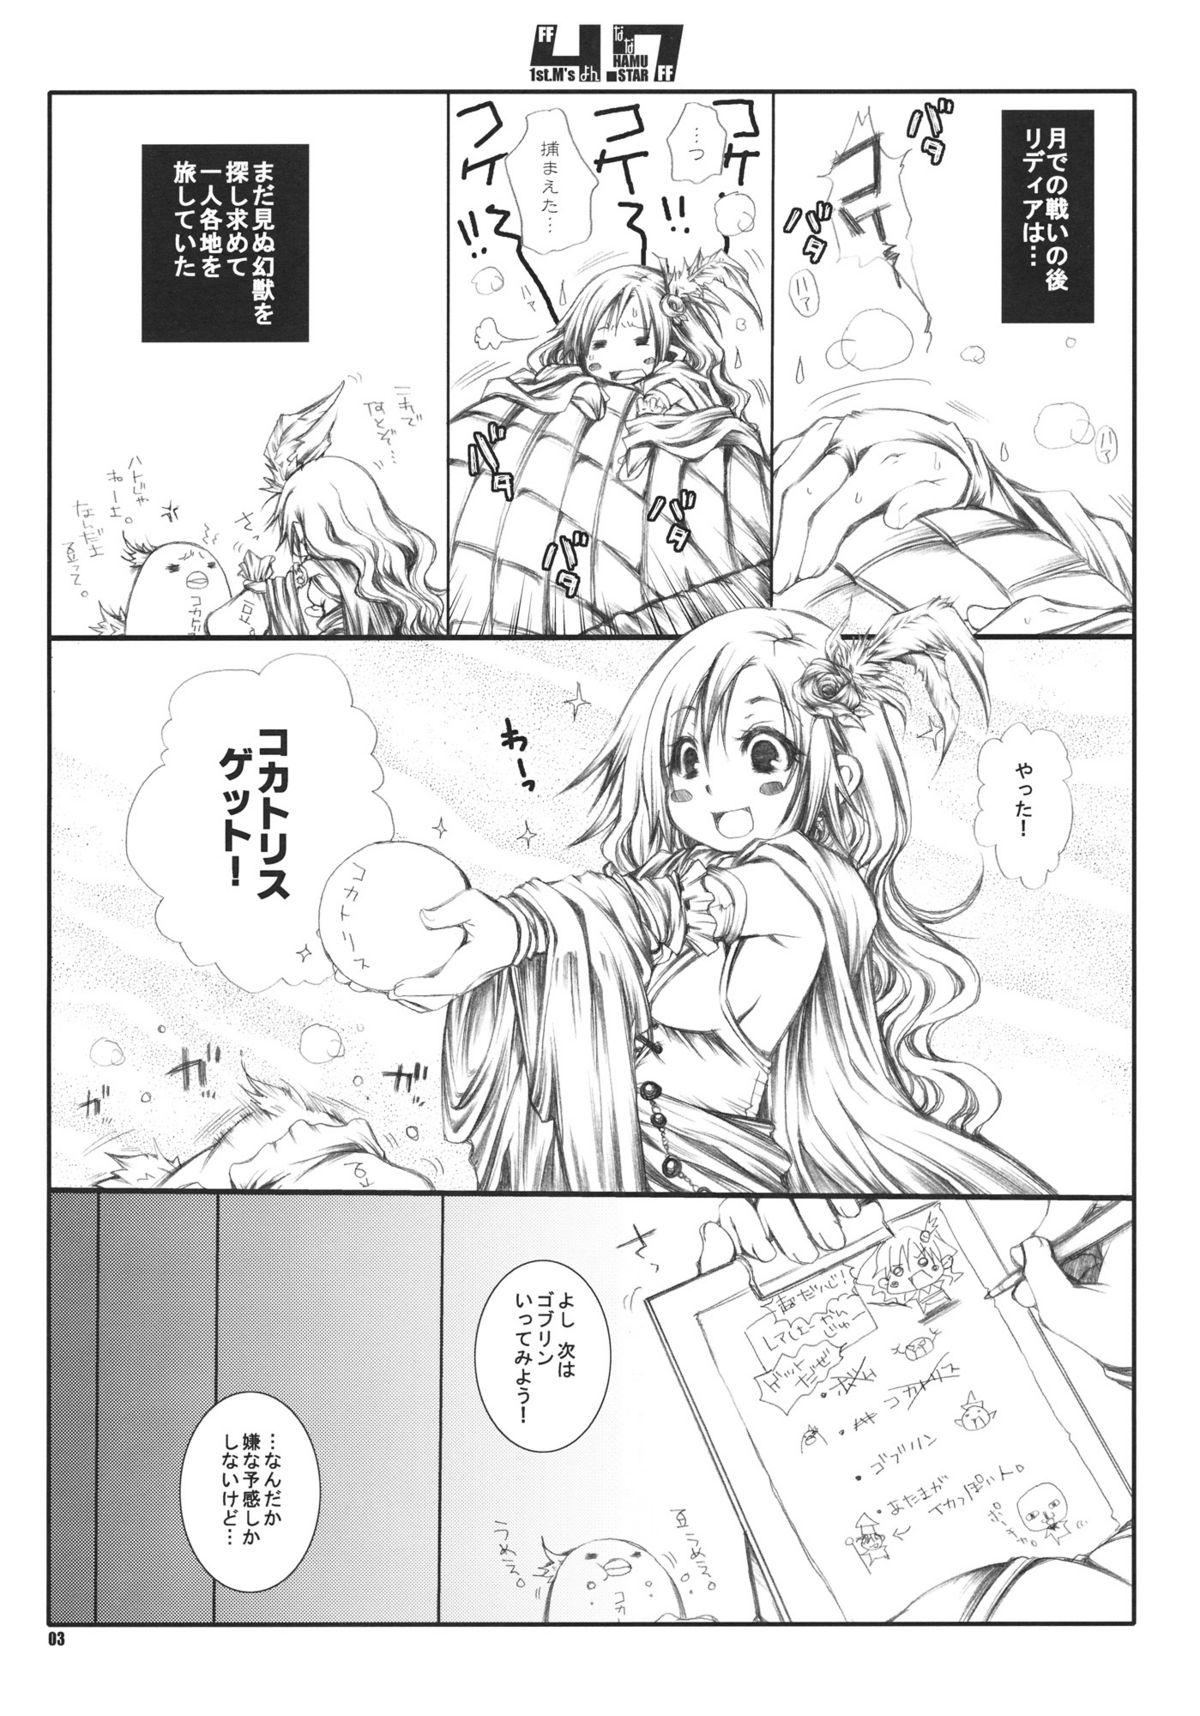 (C80) [1st.M's] 4.7 (Final Fantasy) page 3 full